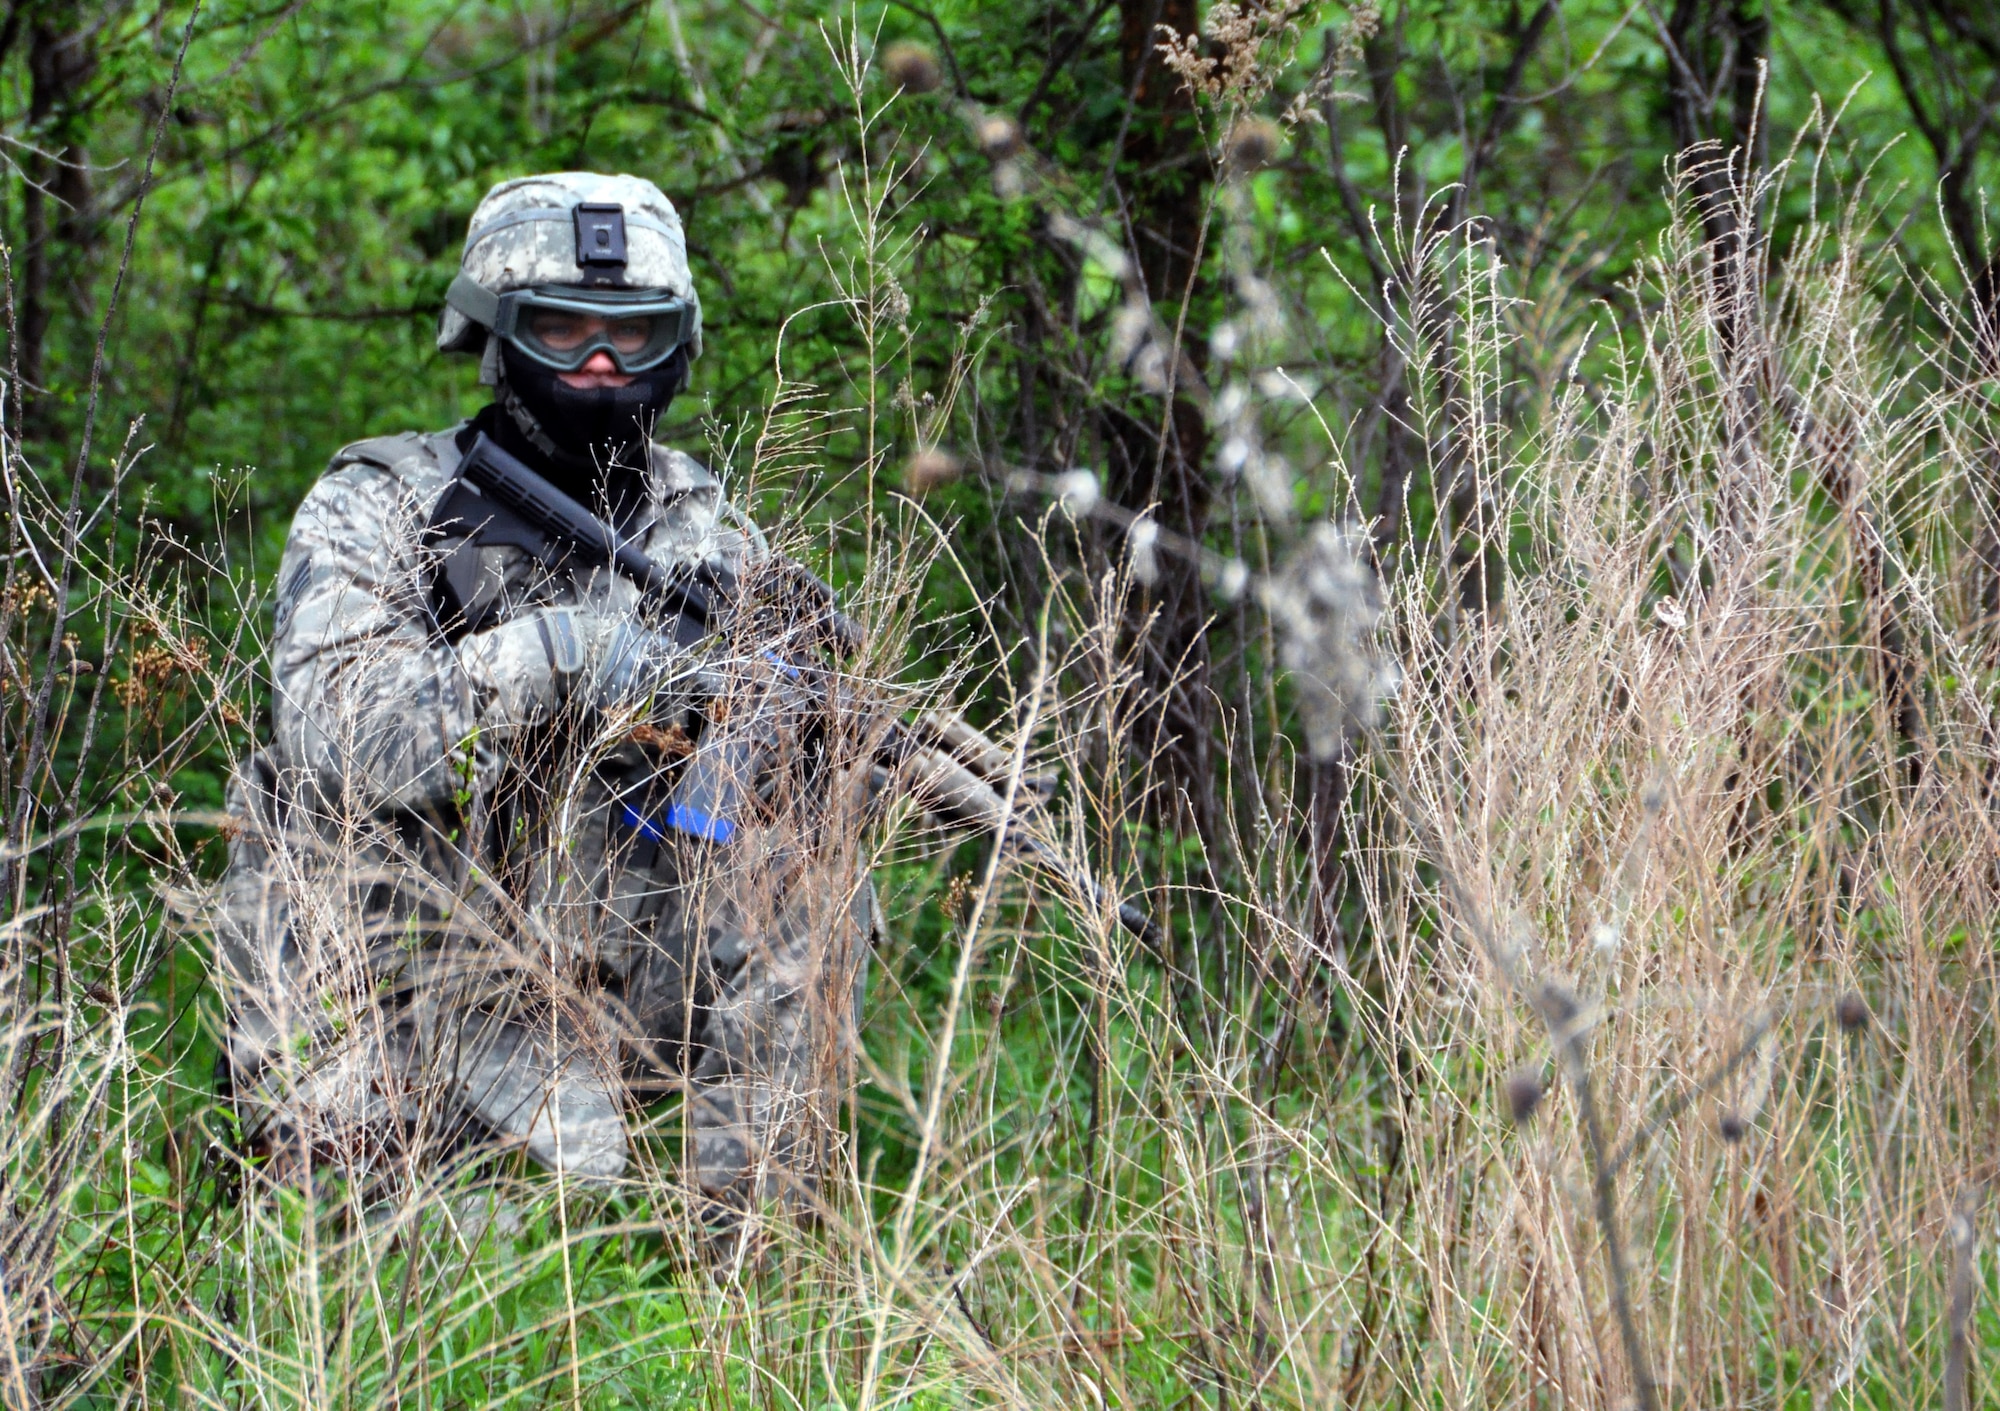 A member of the 931st Security Forces Squadron provides security during a foot patrol exercise at Camp Gruber Training Center, Okla., April 15, 2015.  More than 80 members of the 931 SFS and 931st Civil Engineer Squadron participated in ten days of combat skills training at Camp Gruber, which included land navigation, weapons training, tactical movements, convoy operations, base defense, room clearing procedures, foot patrols, military operations on urban terrain (MOUT) and combat lifesaving.  (U.S. Air Force photo by Capt. Zach Anderson)
